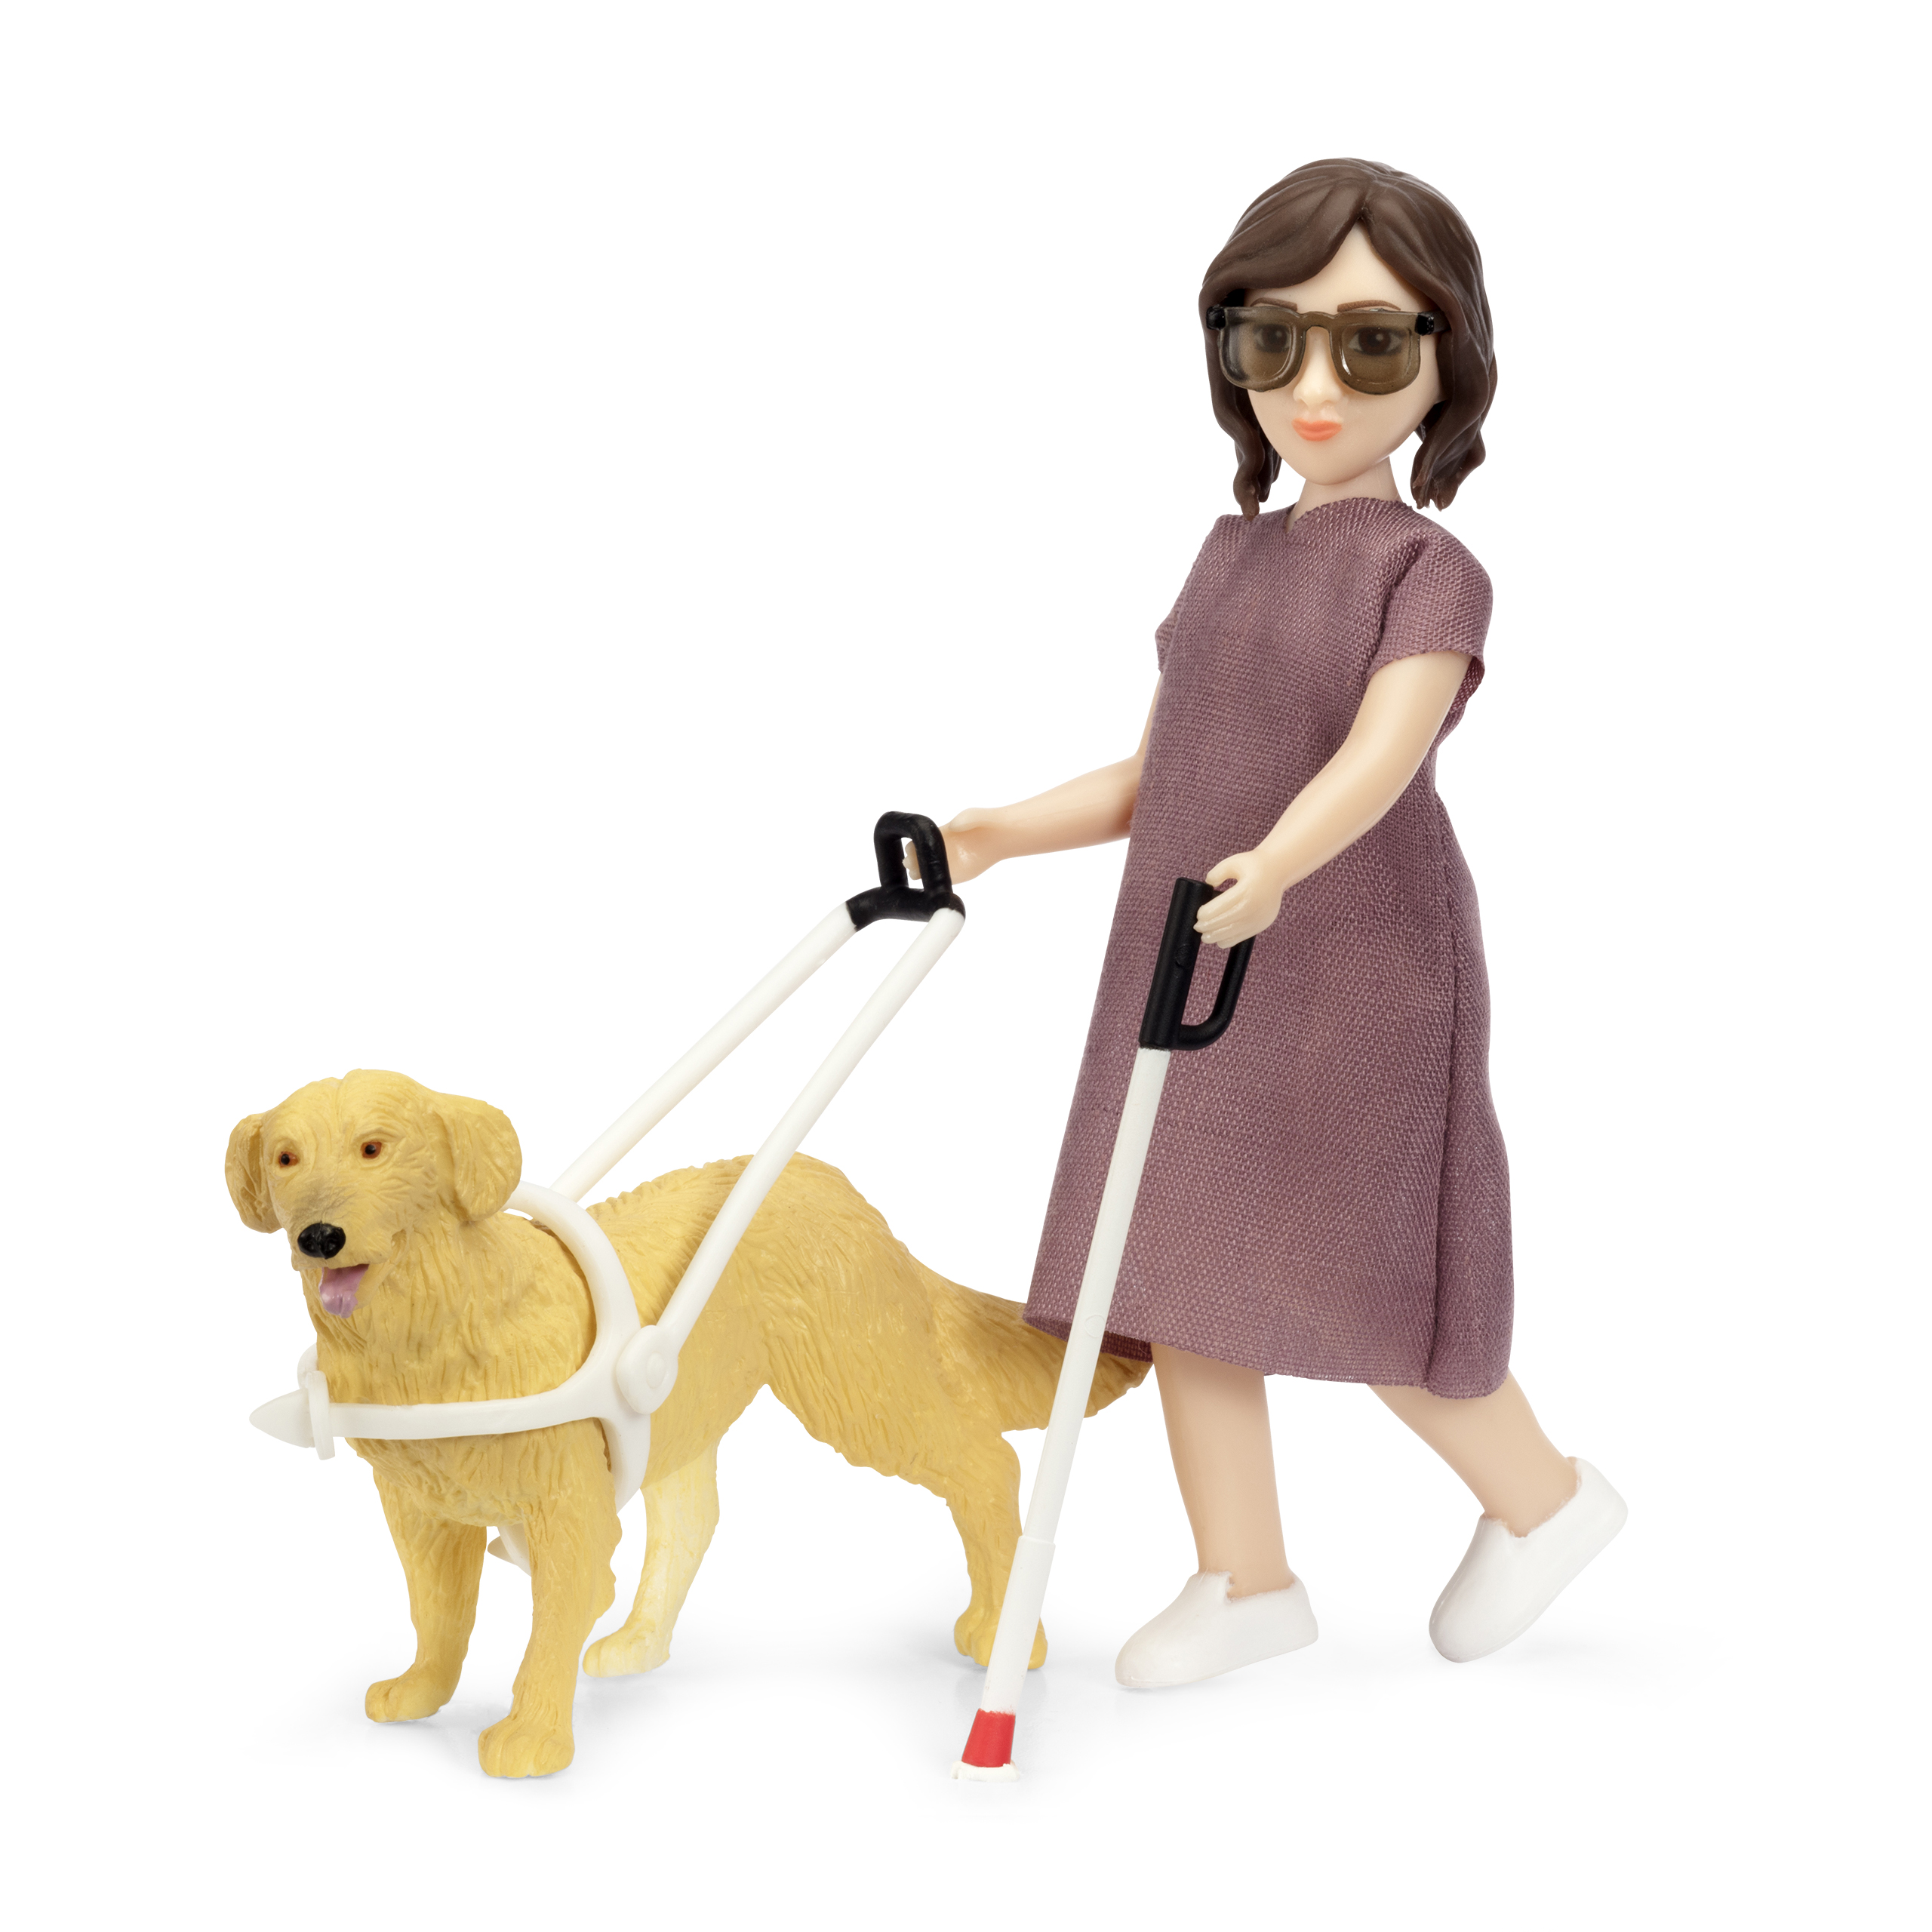 Dolls lundby	doll house dolls with cane and guide dog